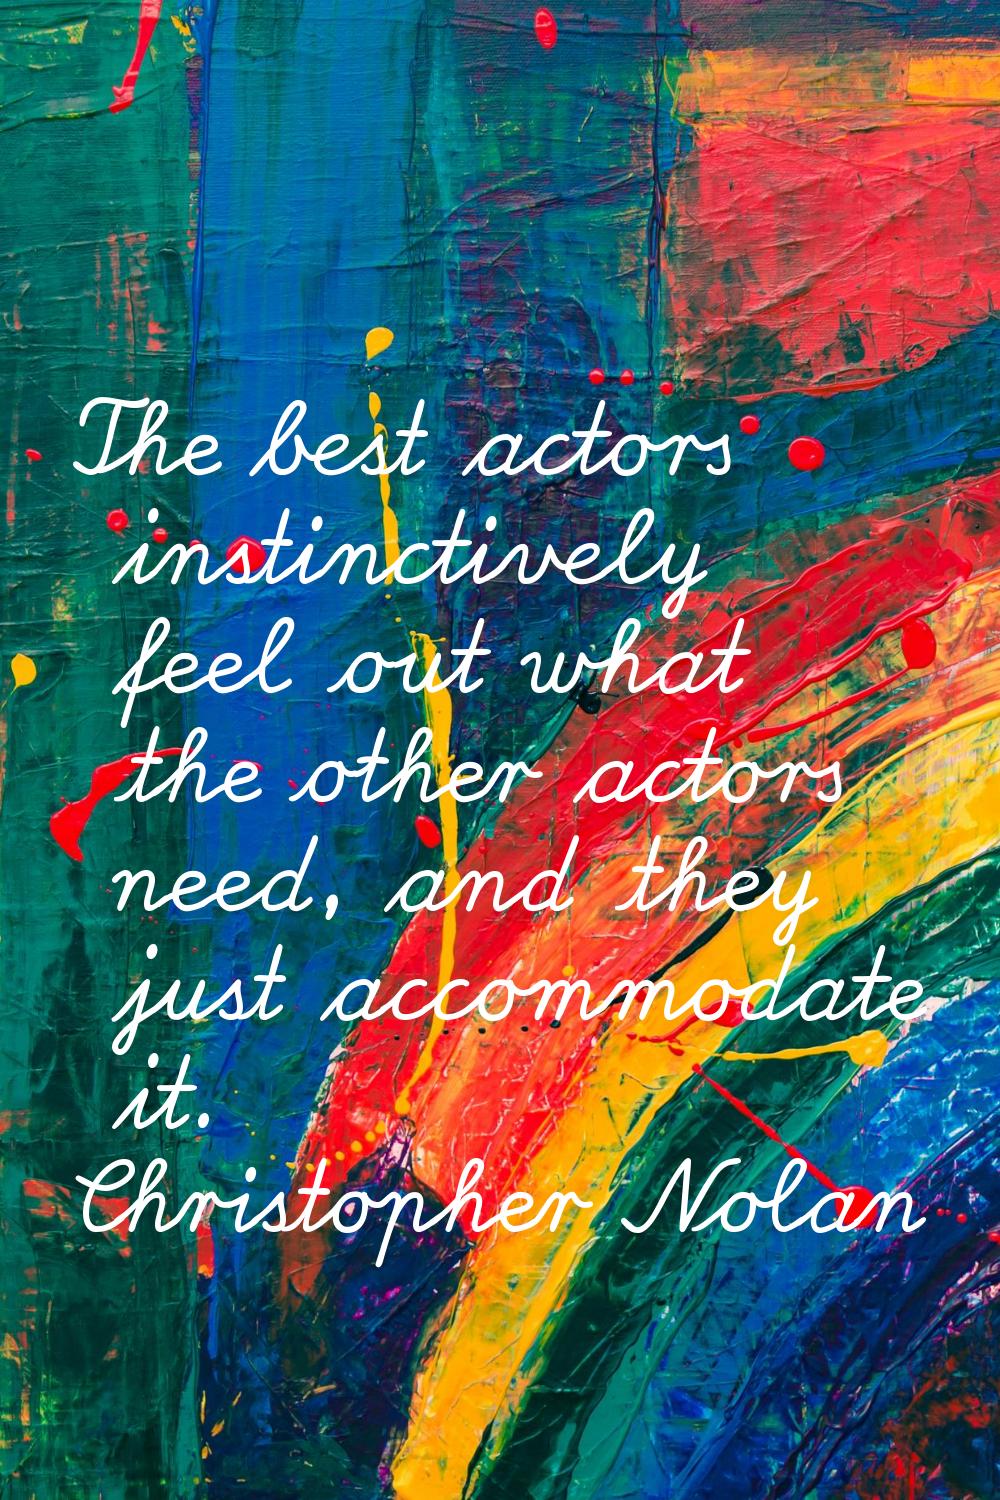 The best actors instinctively feel out what the other actors need, and they just accommodate it.